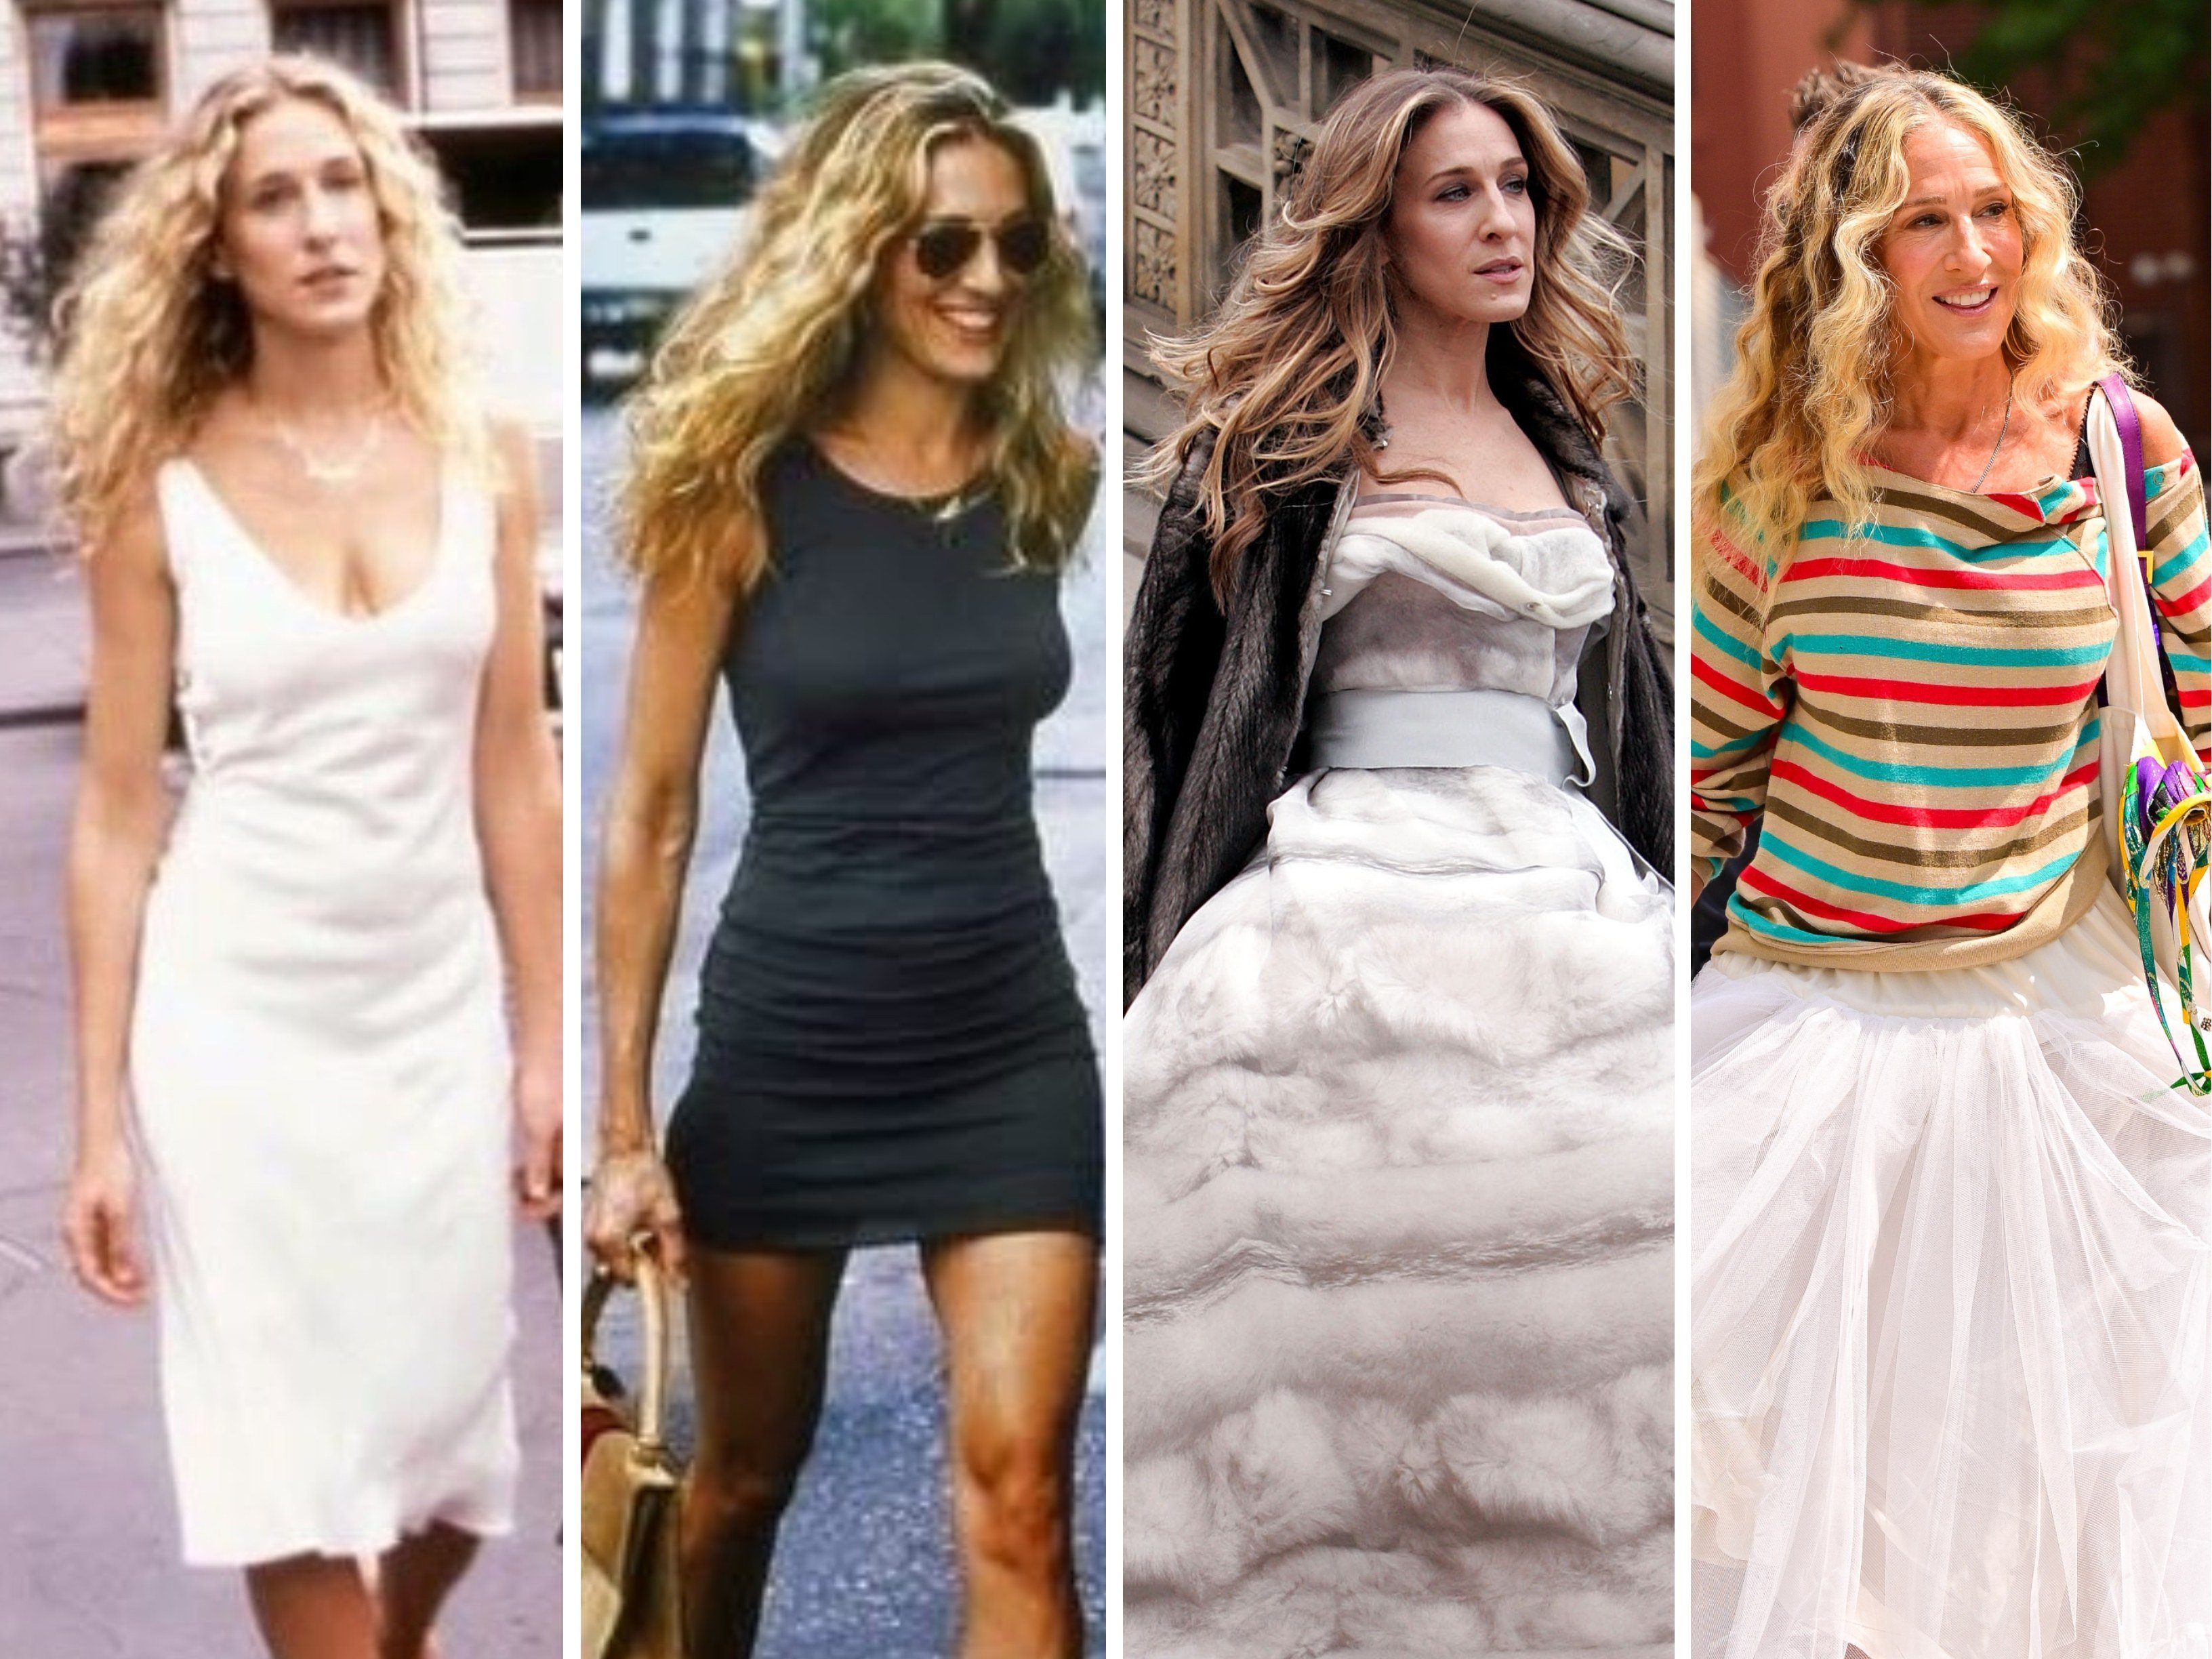 Sarah Jessica Parker rocking Carrie Bradshaw’s most iconic looks on Sex and the City and And Just Like That. Photos: Getty Images, @everyoutfitonsatc/Instagram, She Goes Wear